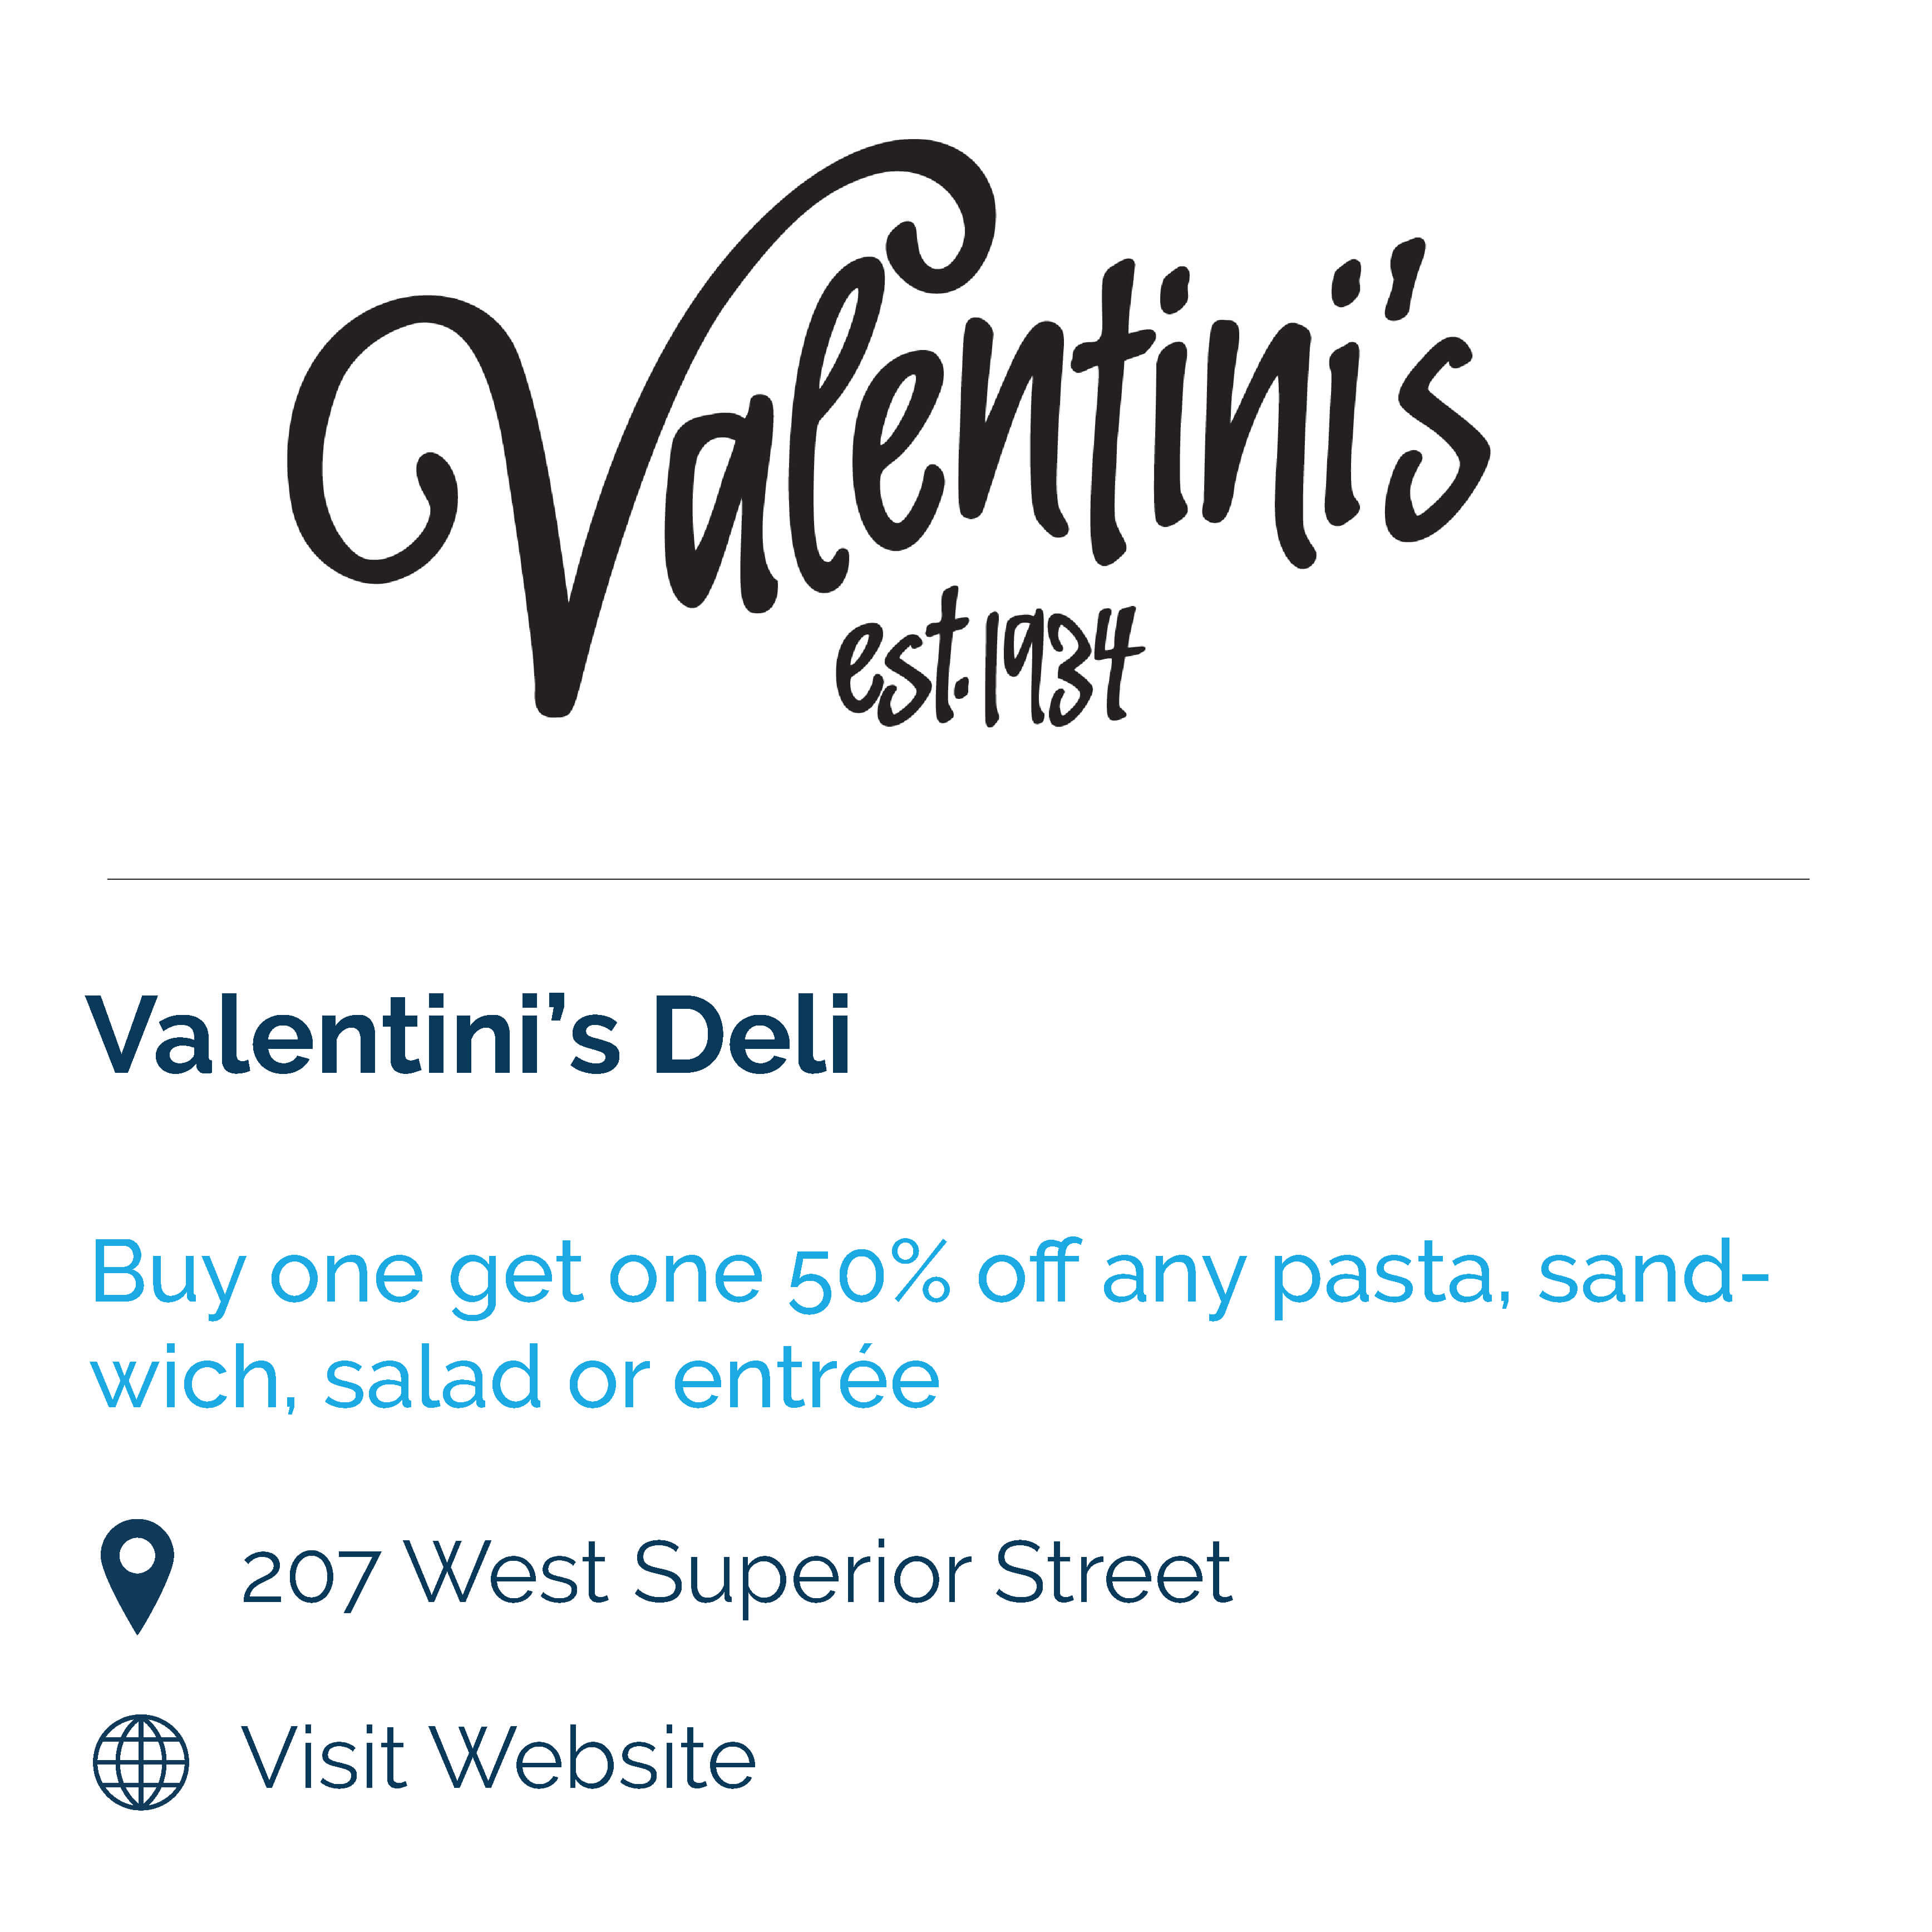 valentini's deli. buy one get one 50% off any pasta, sandwich, salad or entree. 207 west superior street